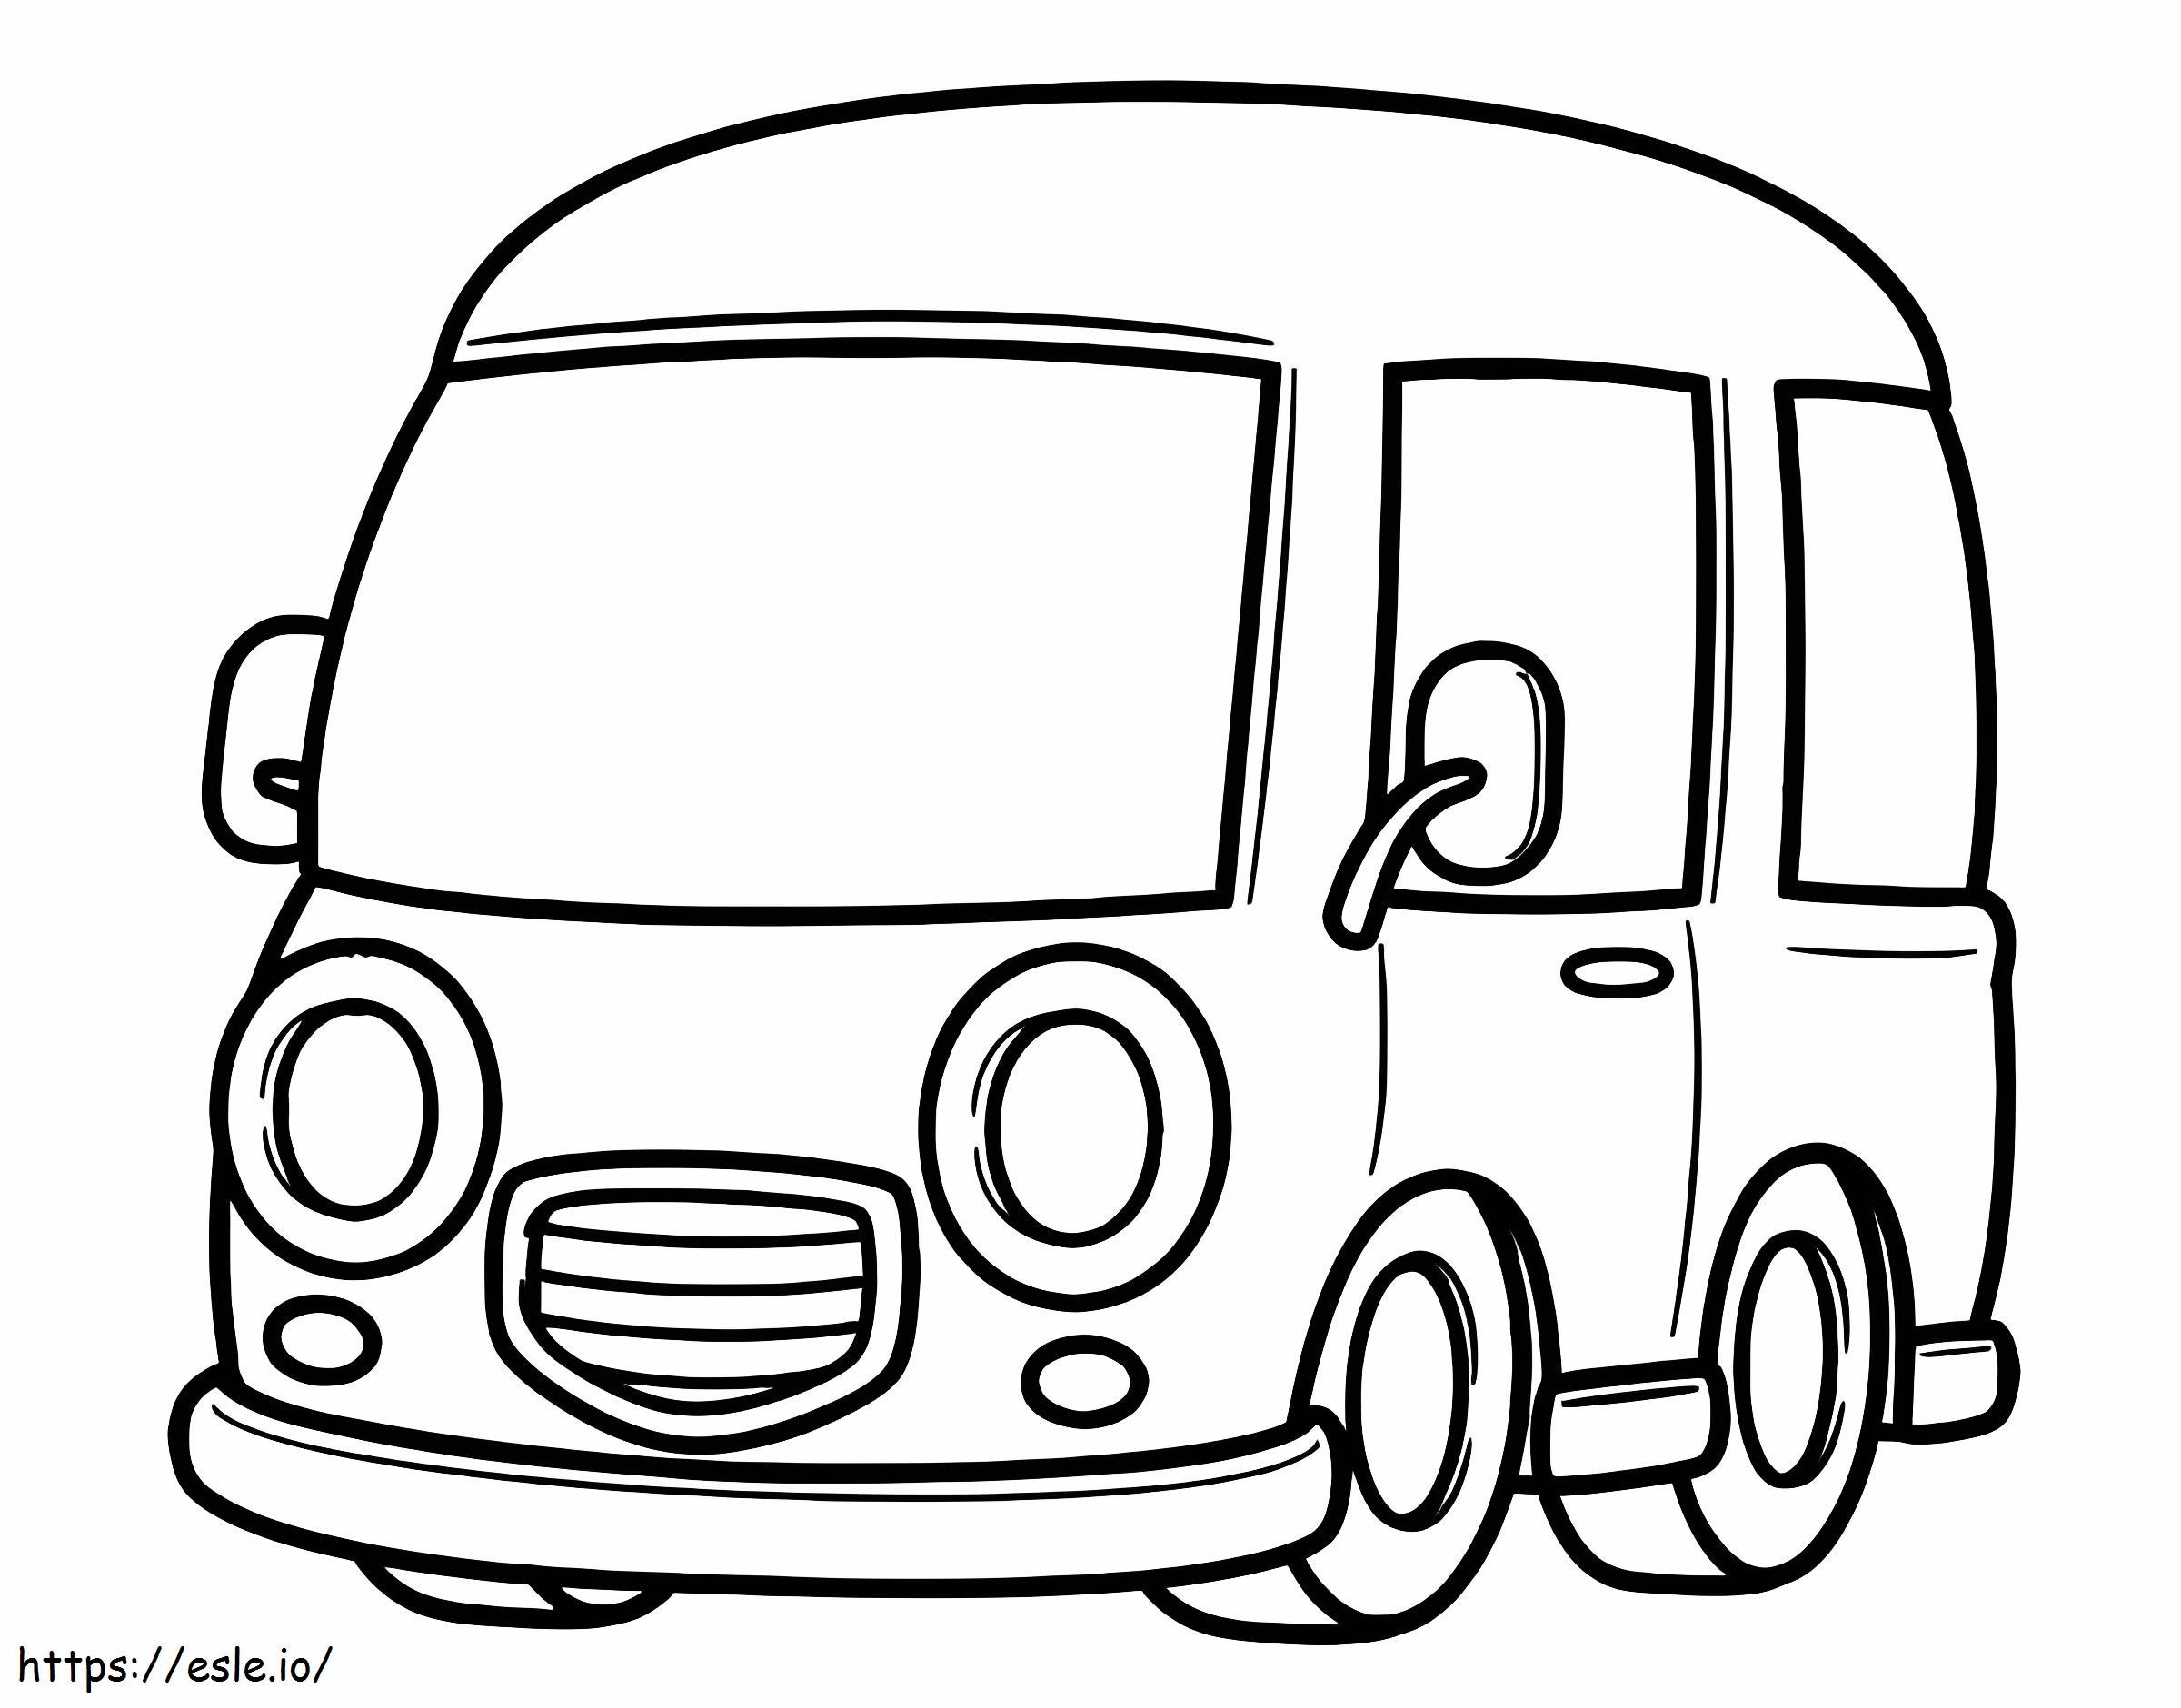 Classic Van coloring page